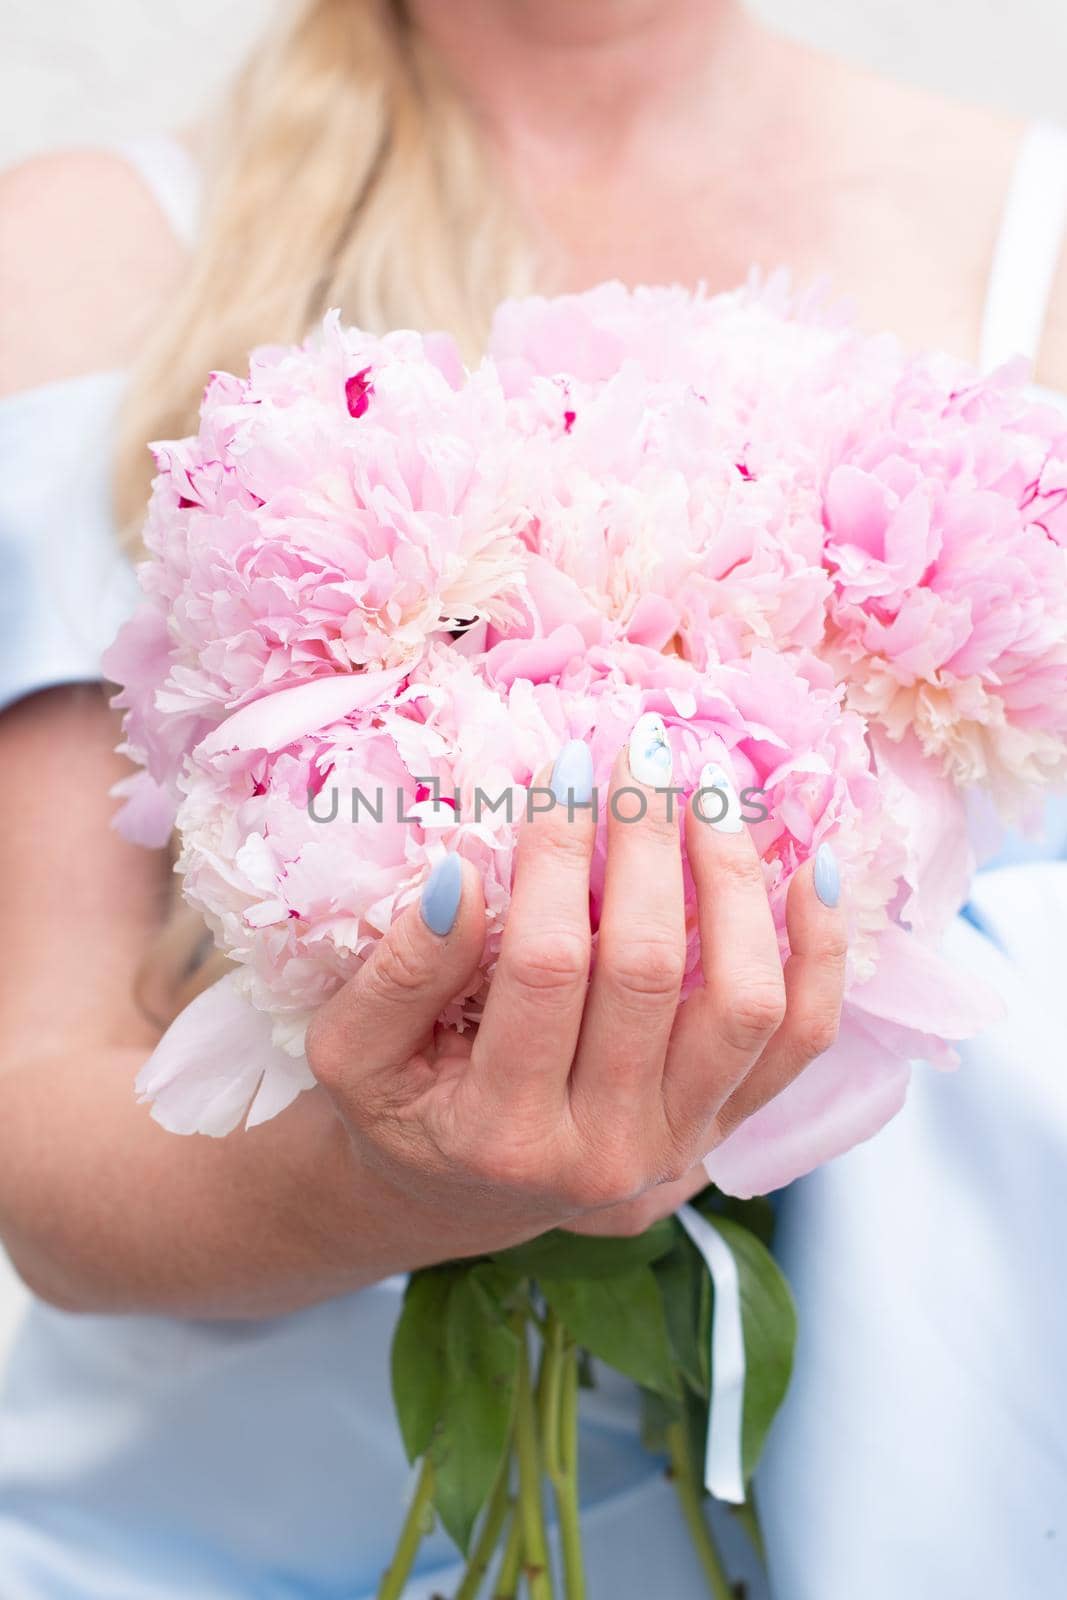 bride in a blue wedding dress with a bouquet of pink peonies, pastel paradise by KaterinaDalemans